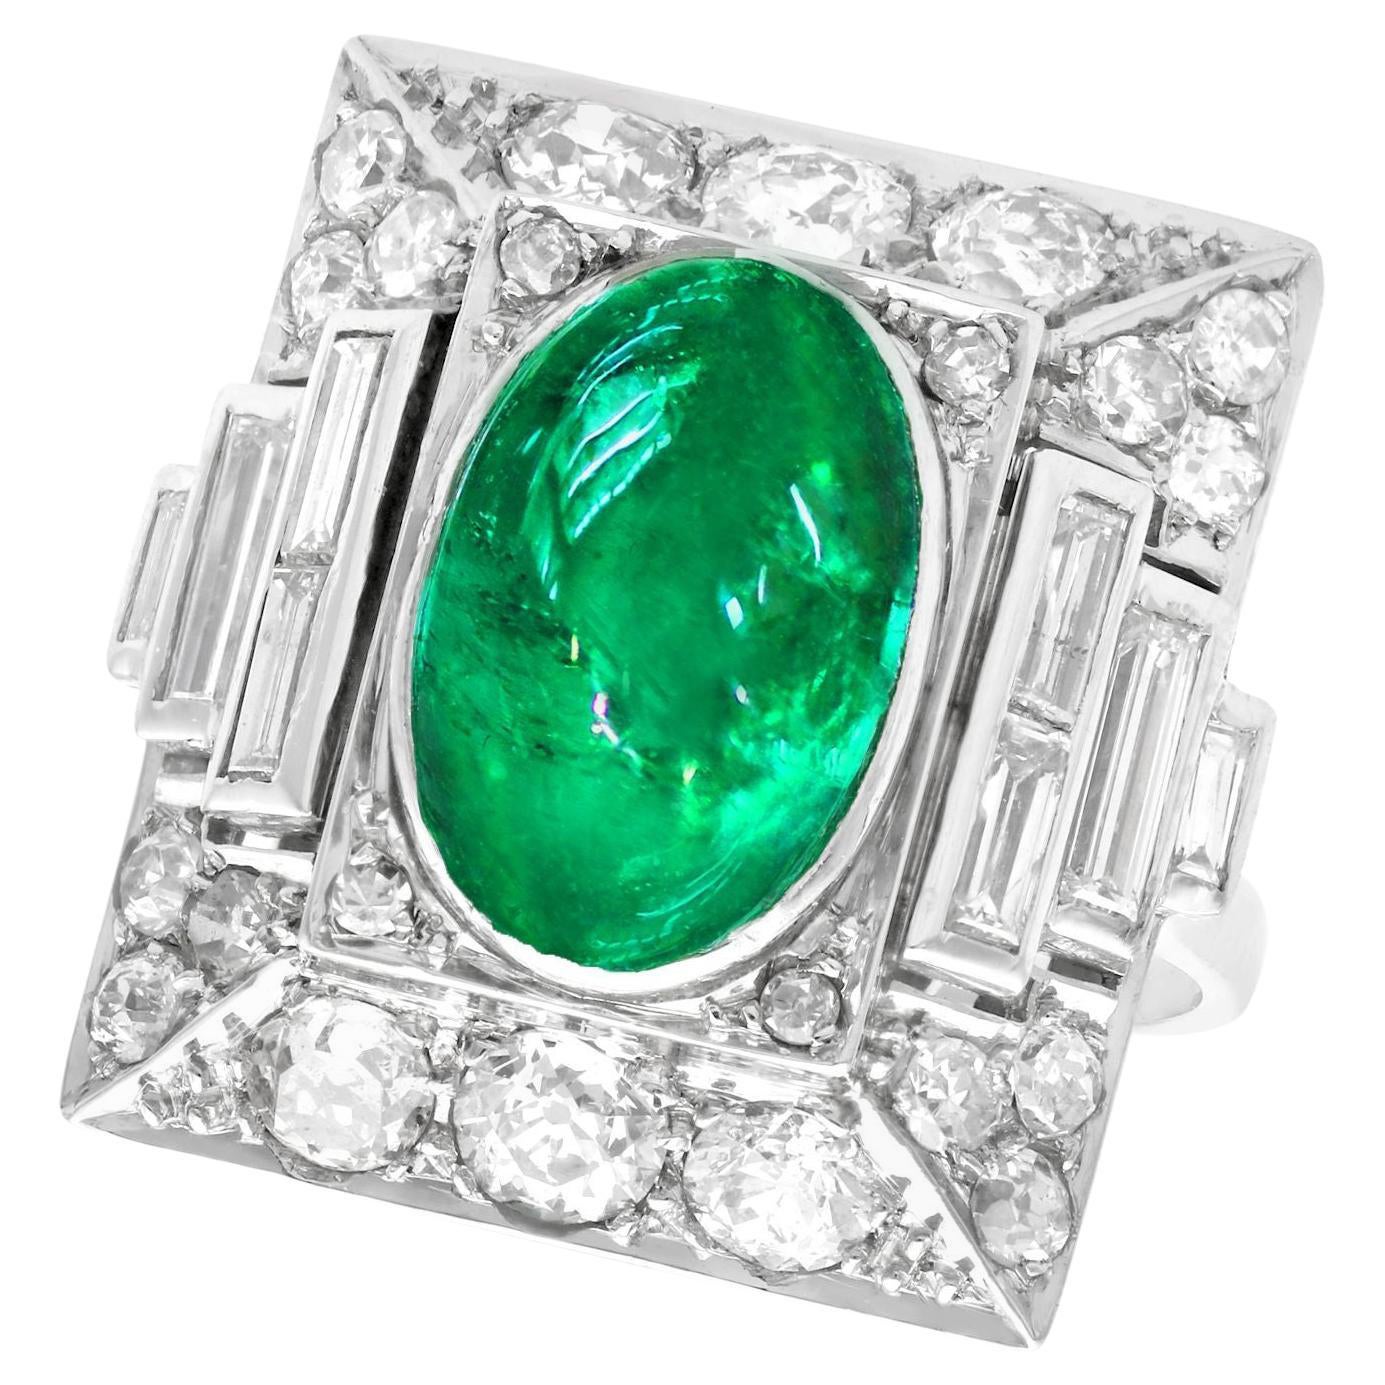 1935 Antique 3.40ct Cabochon Cut Emerald and 2.72ct Diamond Cocktail Ring For Sale